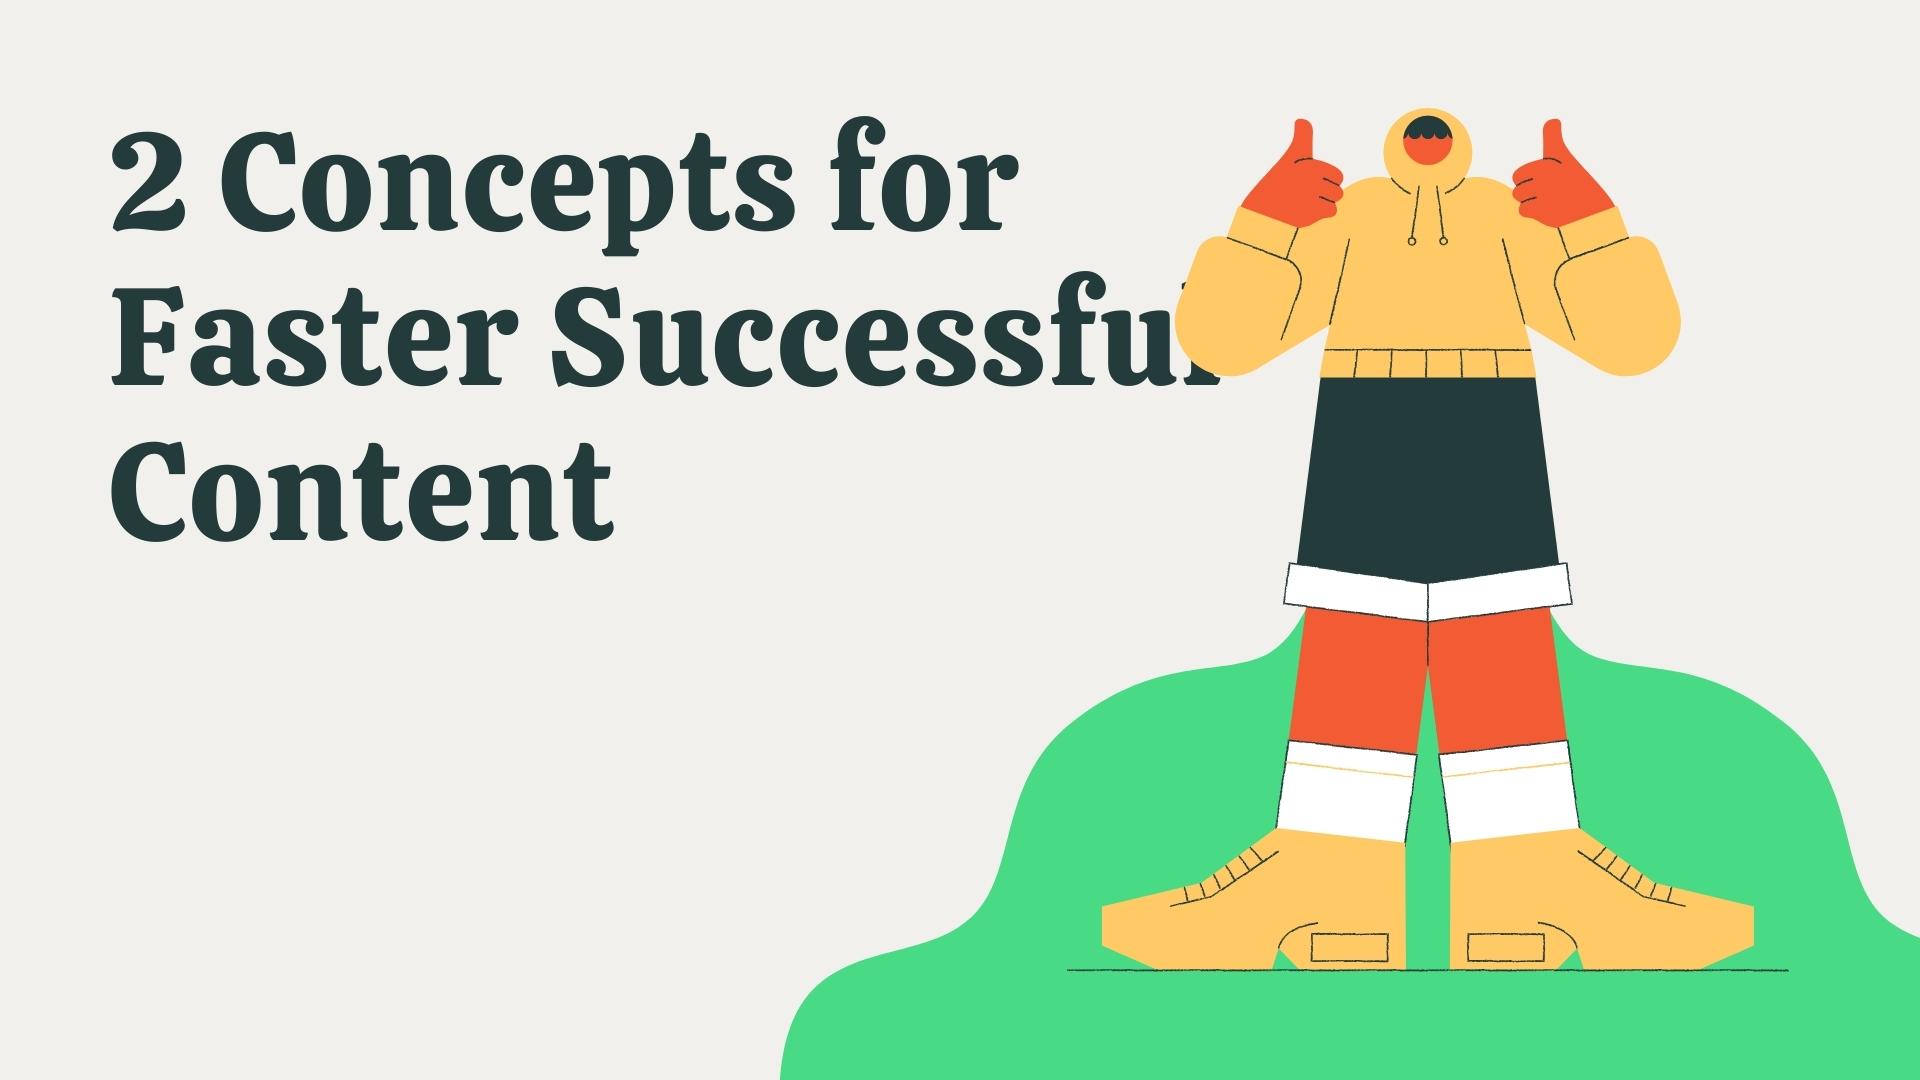 2 concepts for faster successful content - Guide